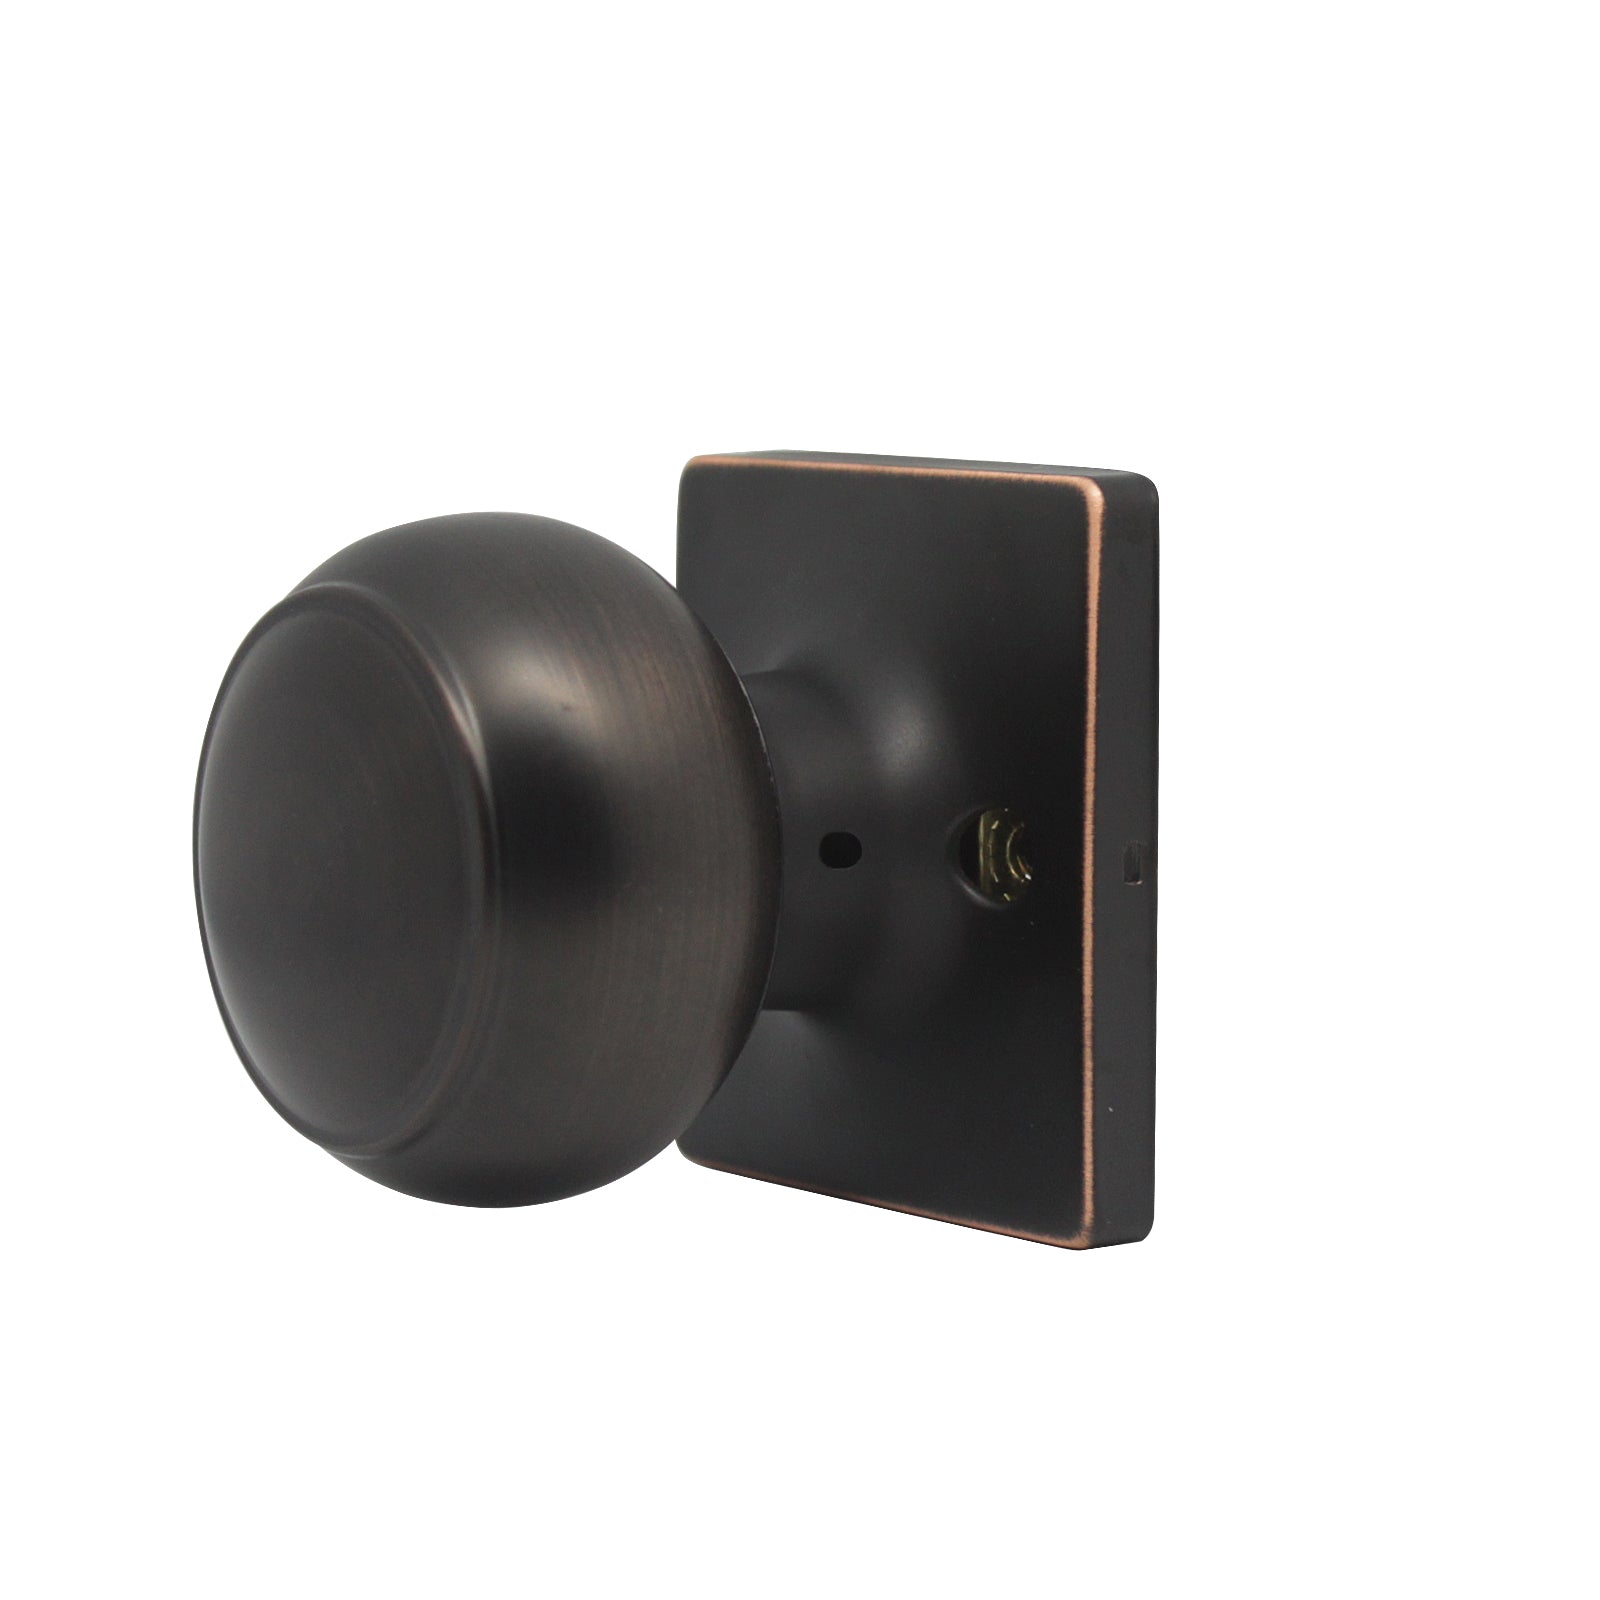 Flat Ball Knob with Square Rosette, Passage Door Knobs Oil Rubbed Bronze Finish DLS09ORBPS